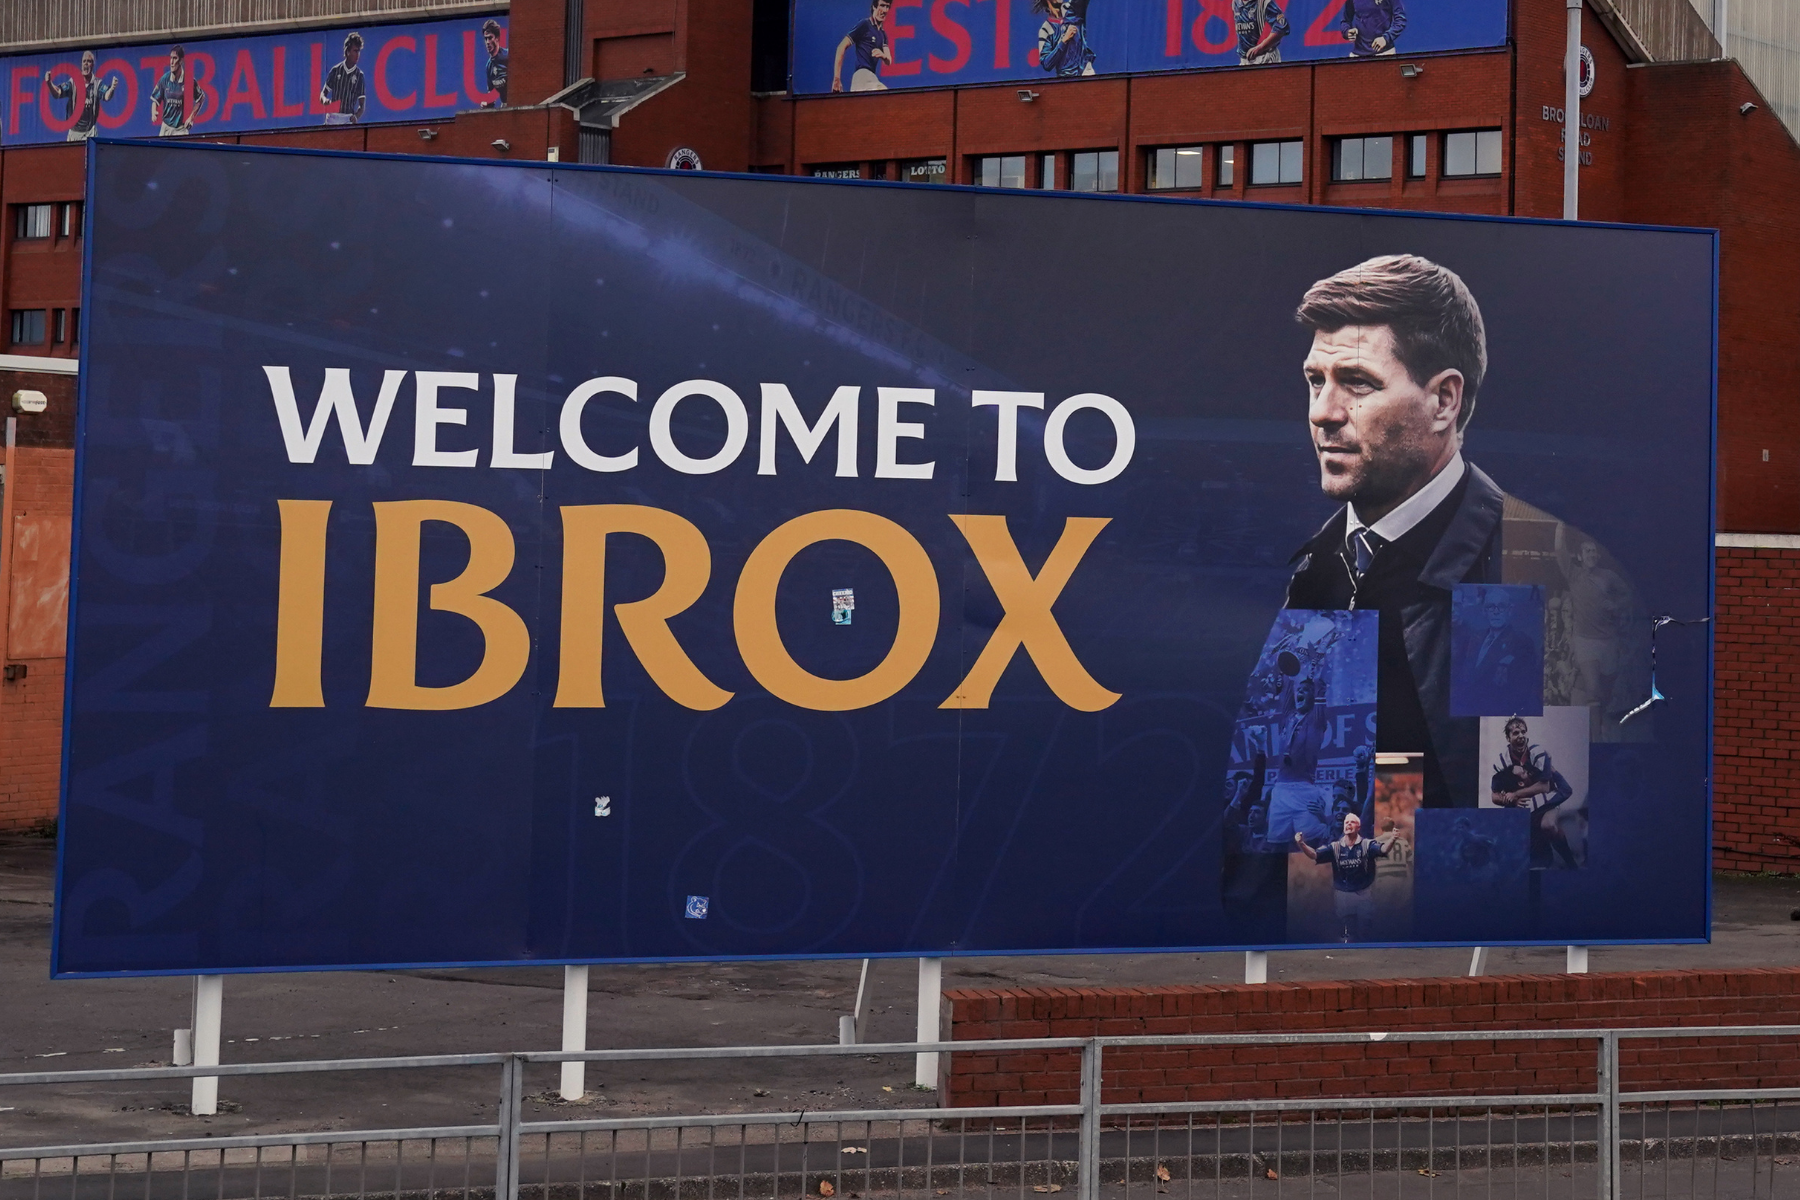 Rangers replace Ibrox sign after Steven Gerrard's move to Aston Villa